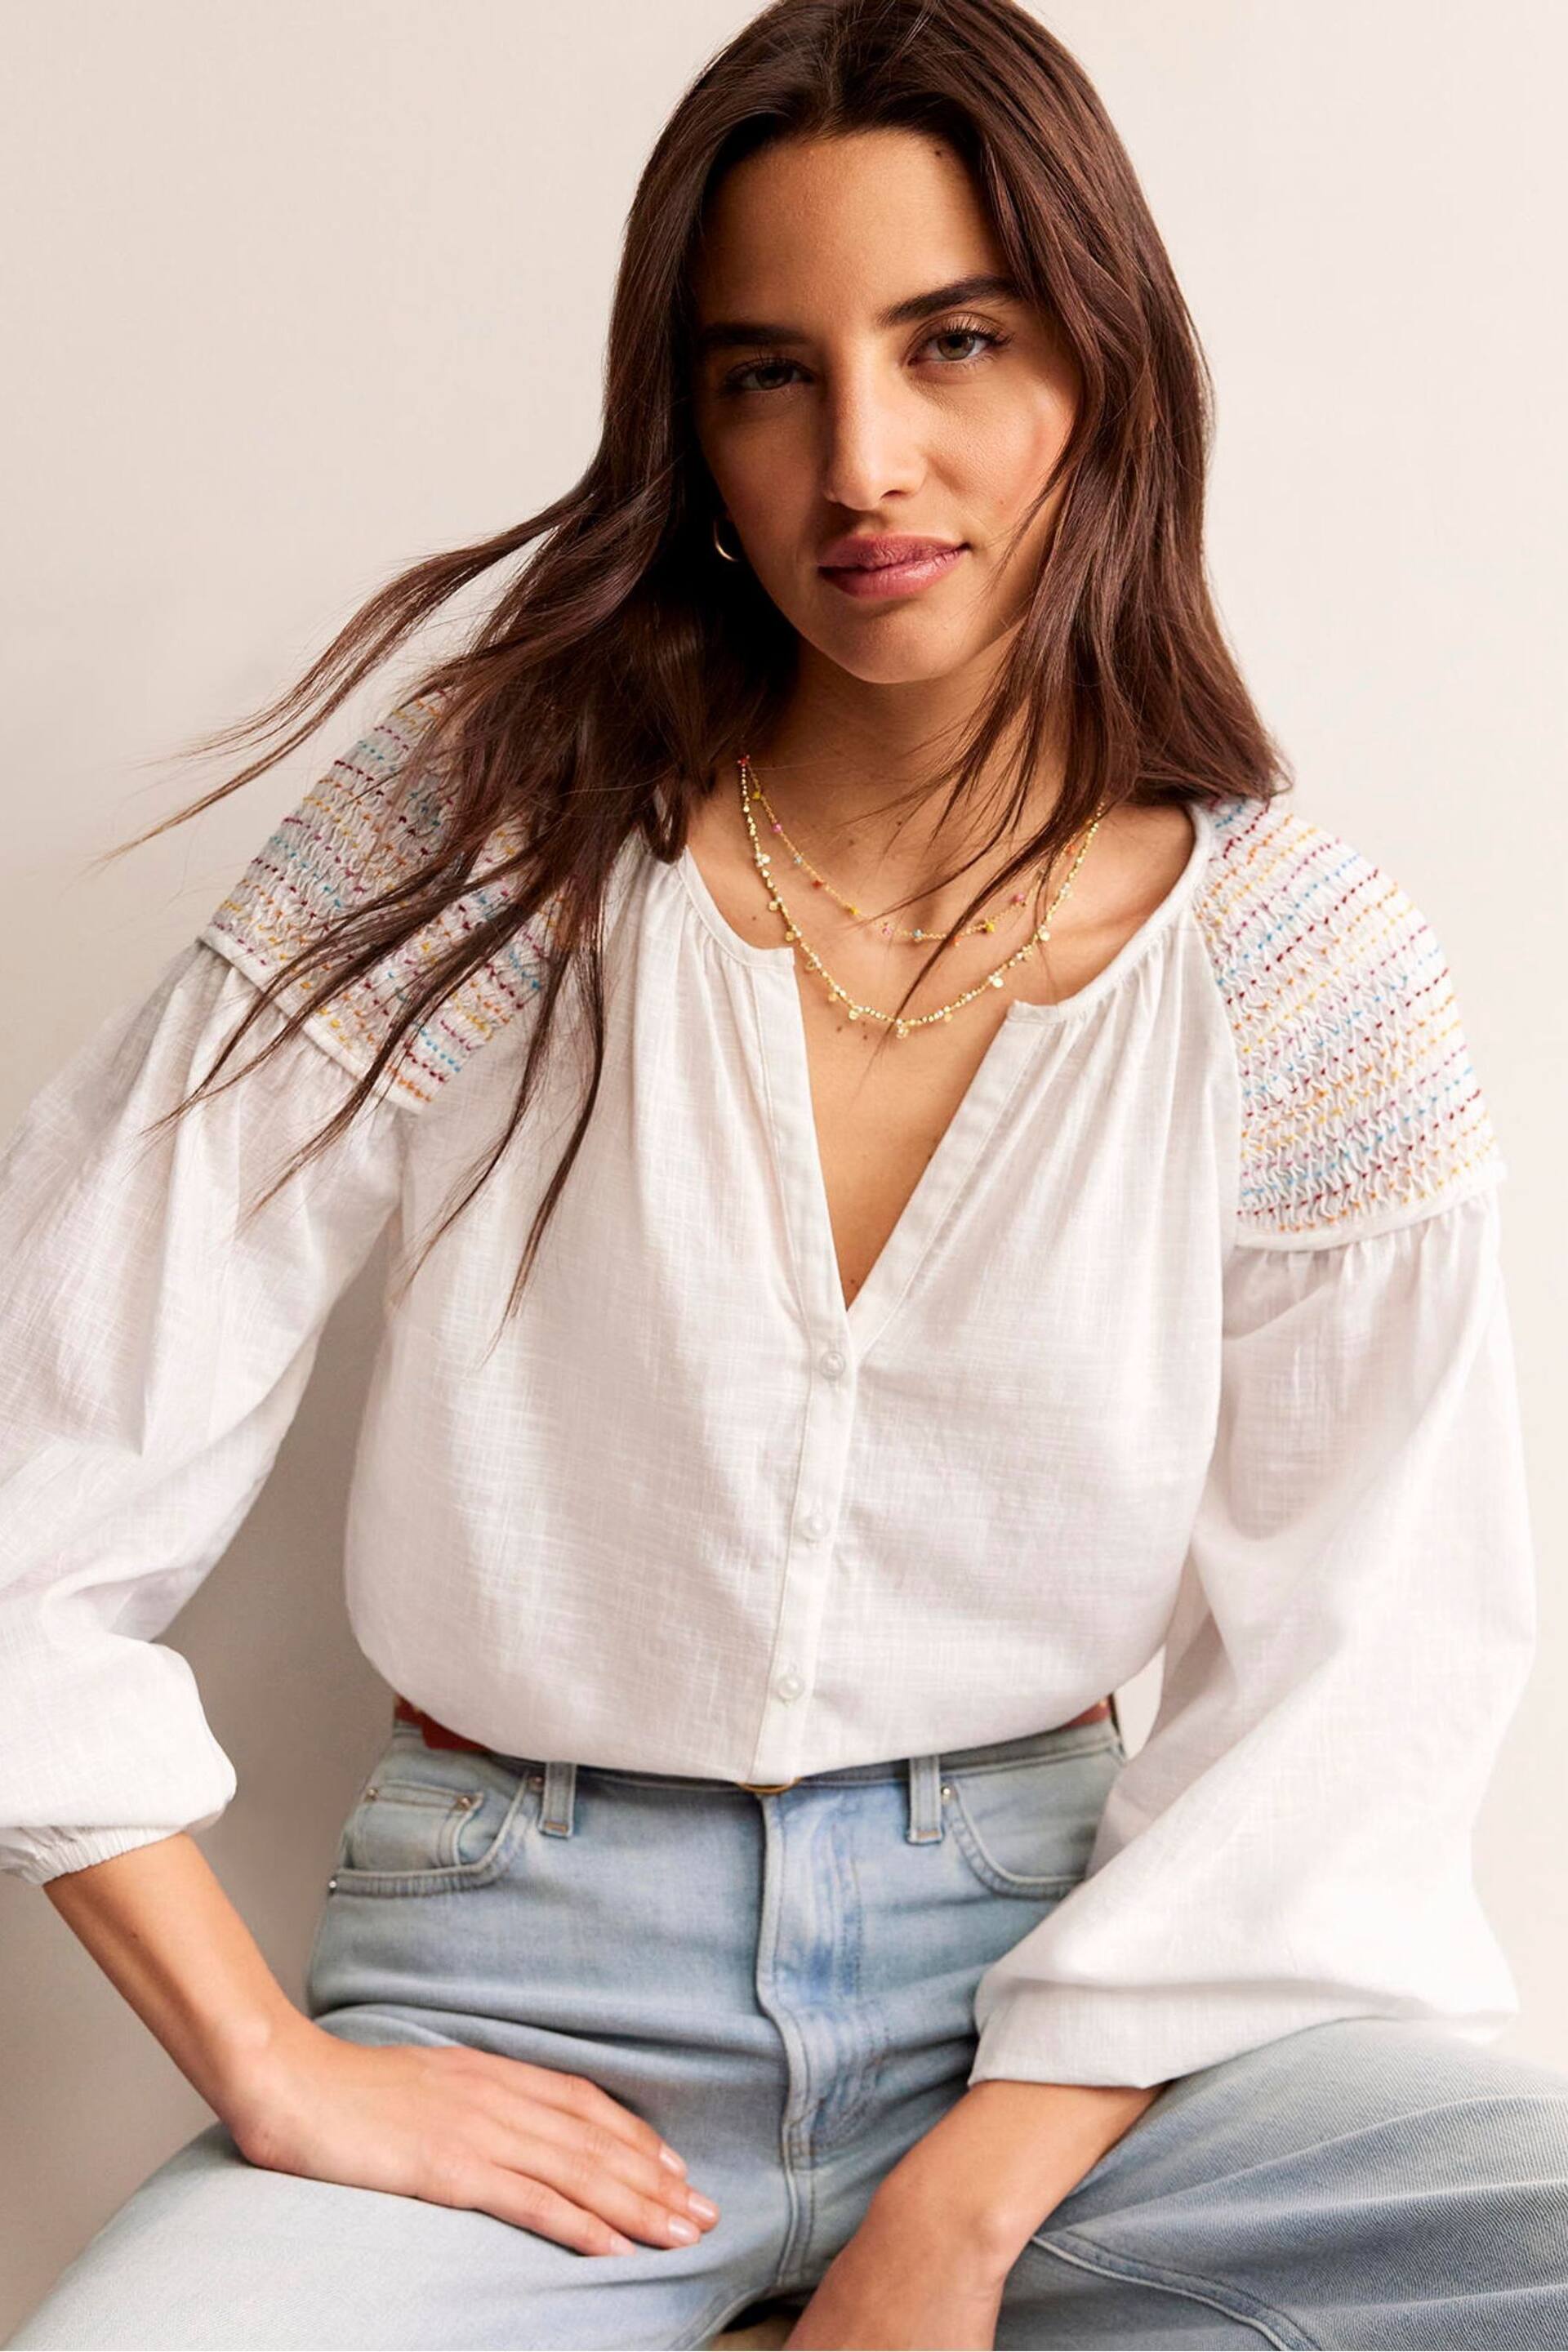 Boden White Cotton Smocked Blouse - Image 1 of 5